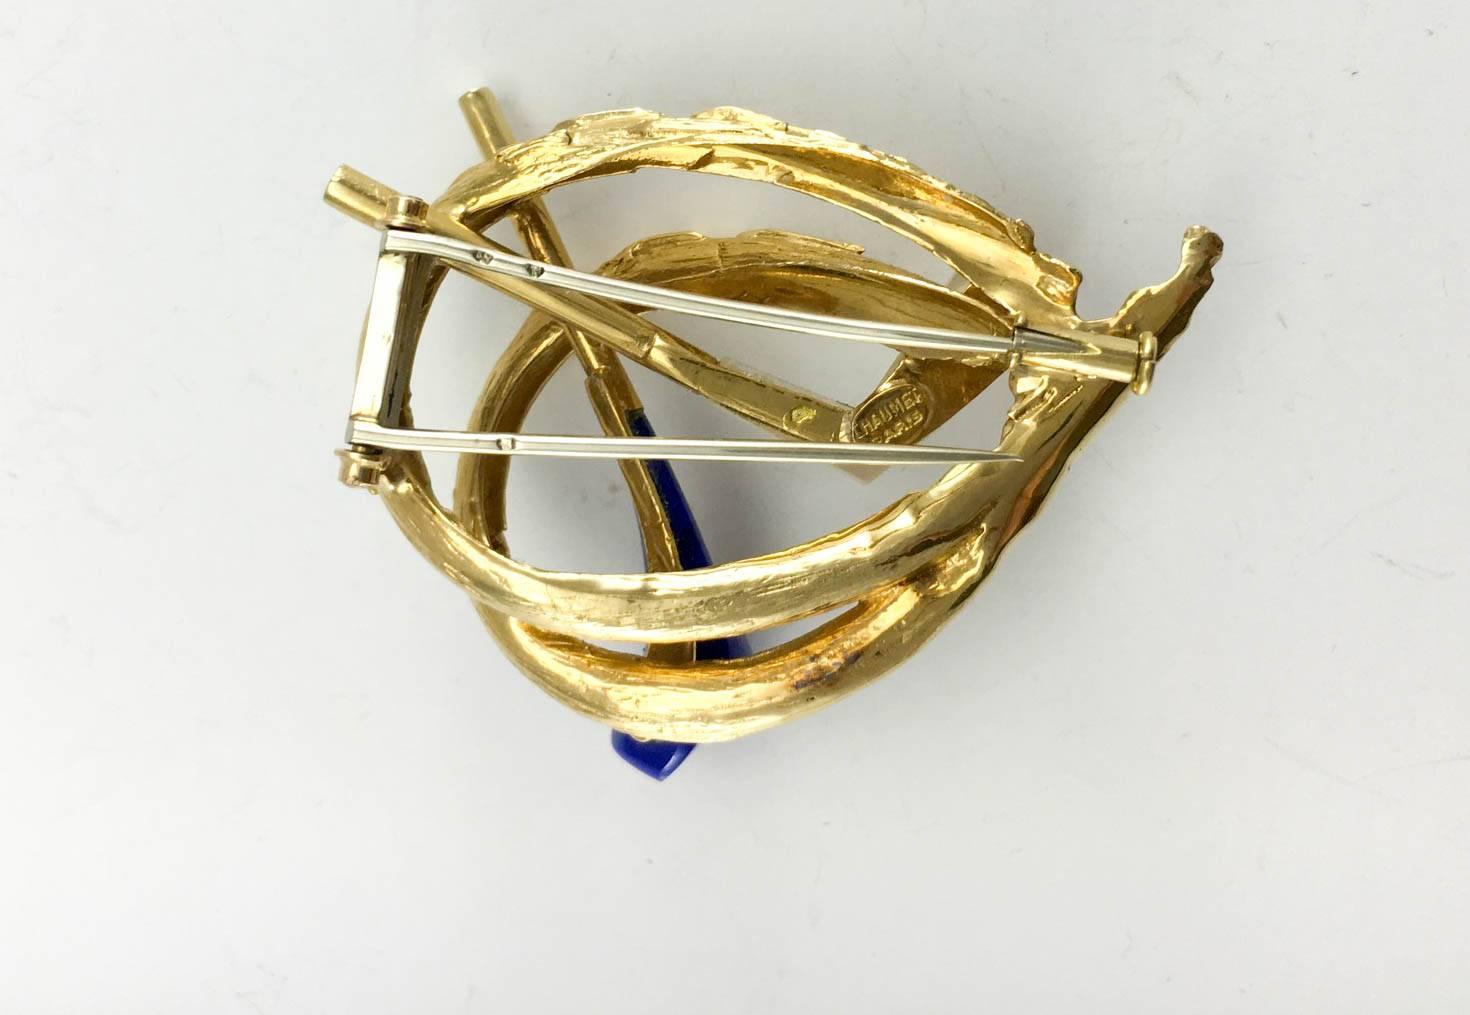 Women's Chaumet 18K Gold, Lapis Lazuli and Mother of Pearl Golfing Brooch - 1960s